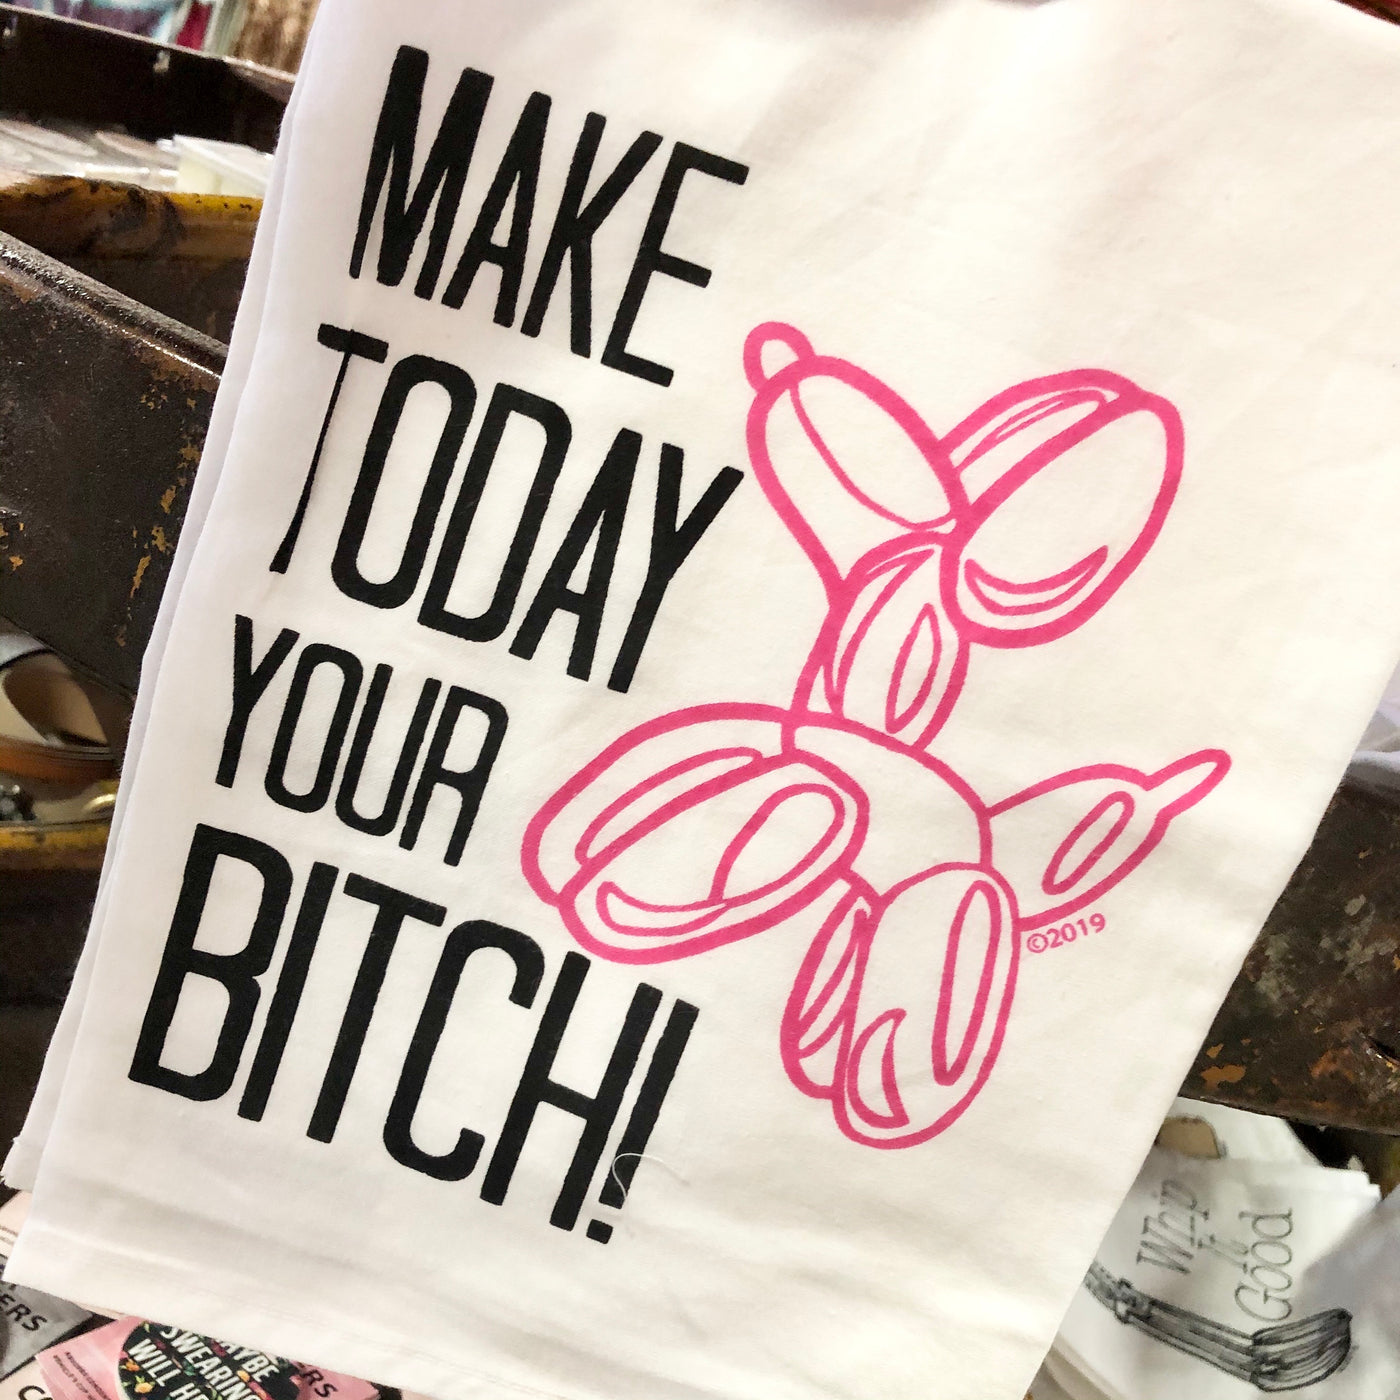 Make Today Your Bitch Dish Towel